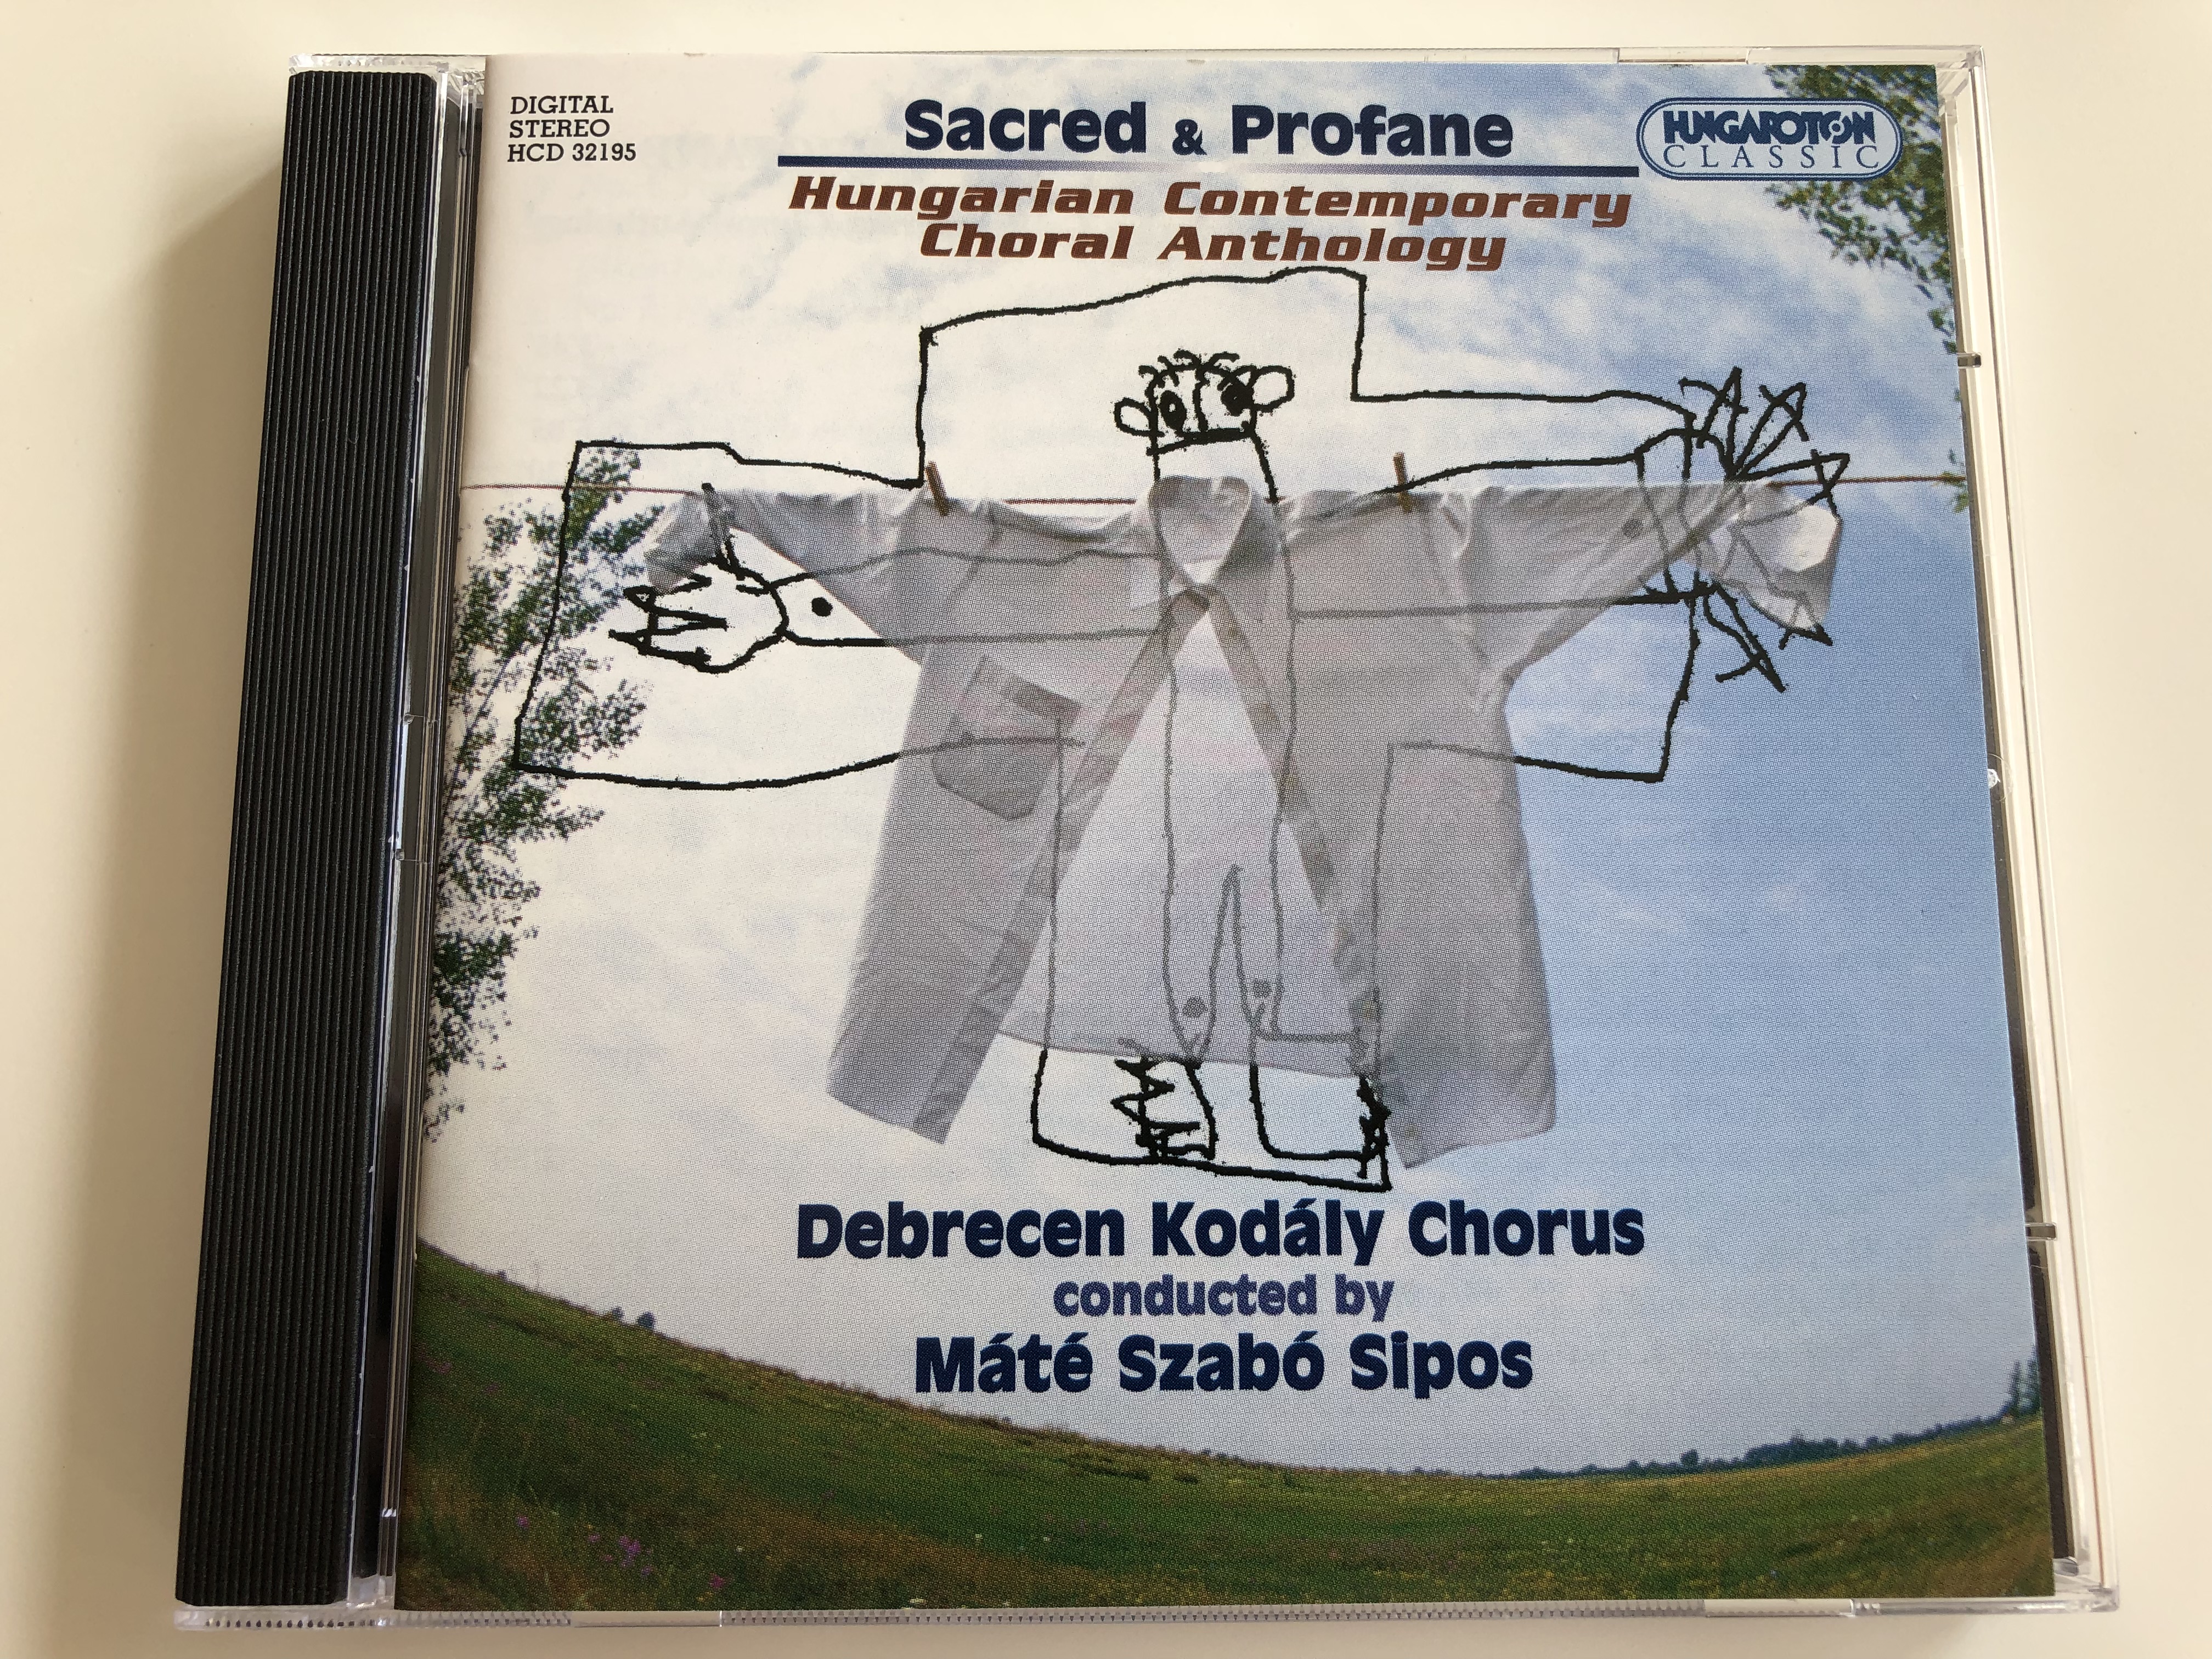 sacred-profane-hungarian-contemporary-choral-anthology-debrecen-kod-ly-chorus-conducted-by-m-t-szab-sipos-hungaroton-classic-audio-cd-2003-hcd-32195-1-.jpg